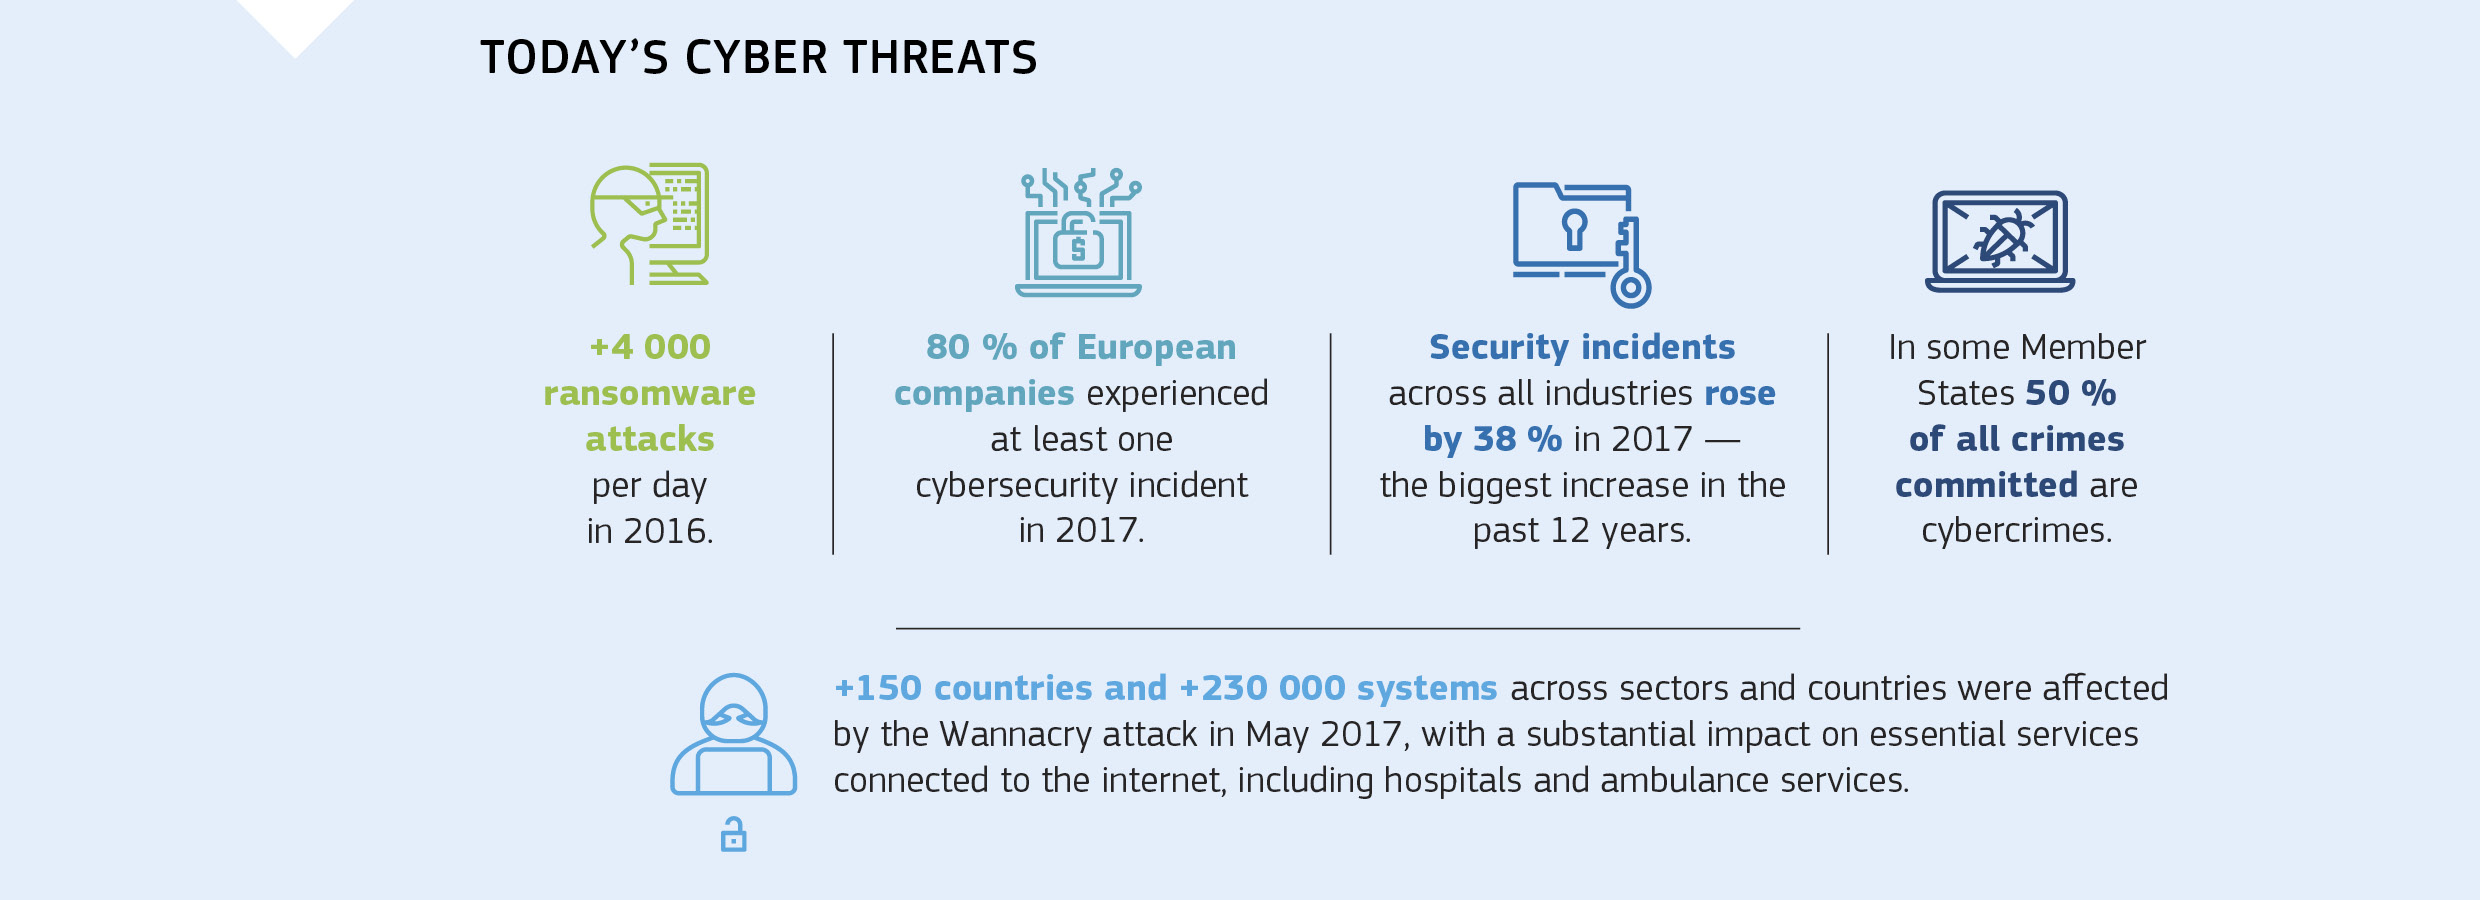 TODAY’S CYBER THREATS